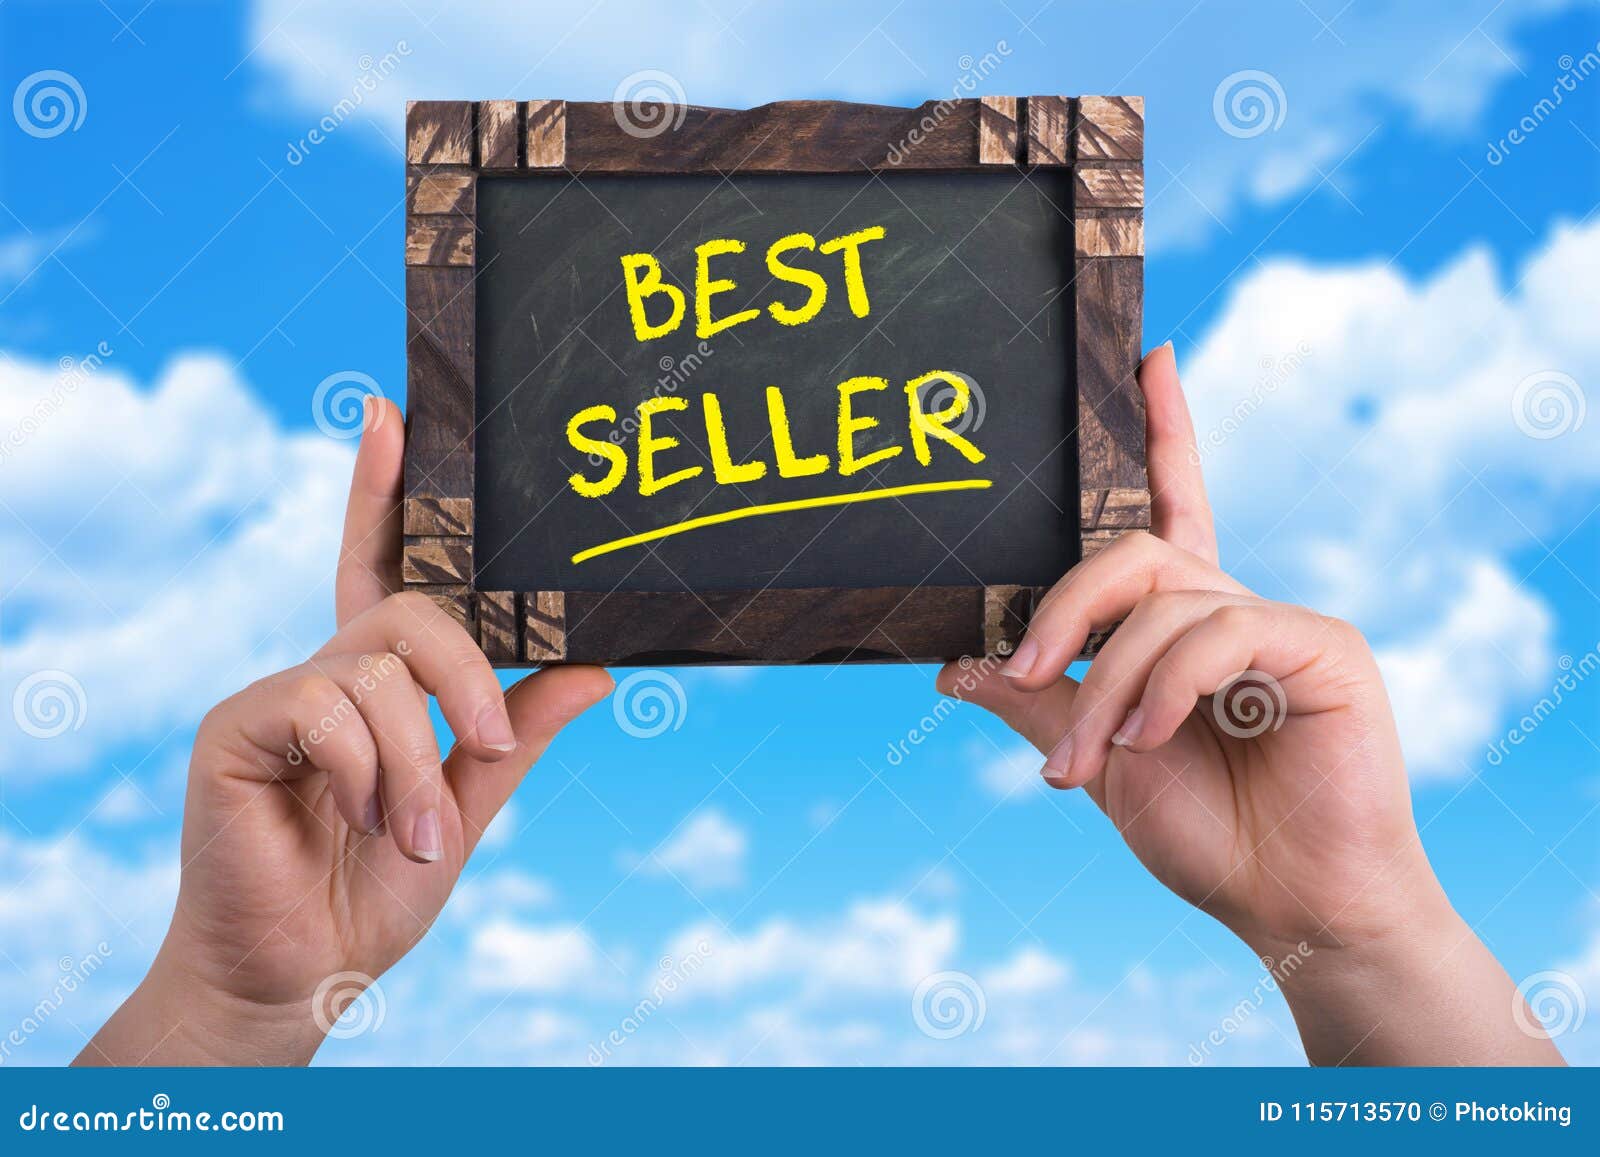 98,977 Best Seller Royalty-Free Images, Stock Photos & Pictures